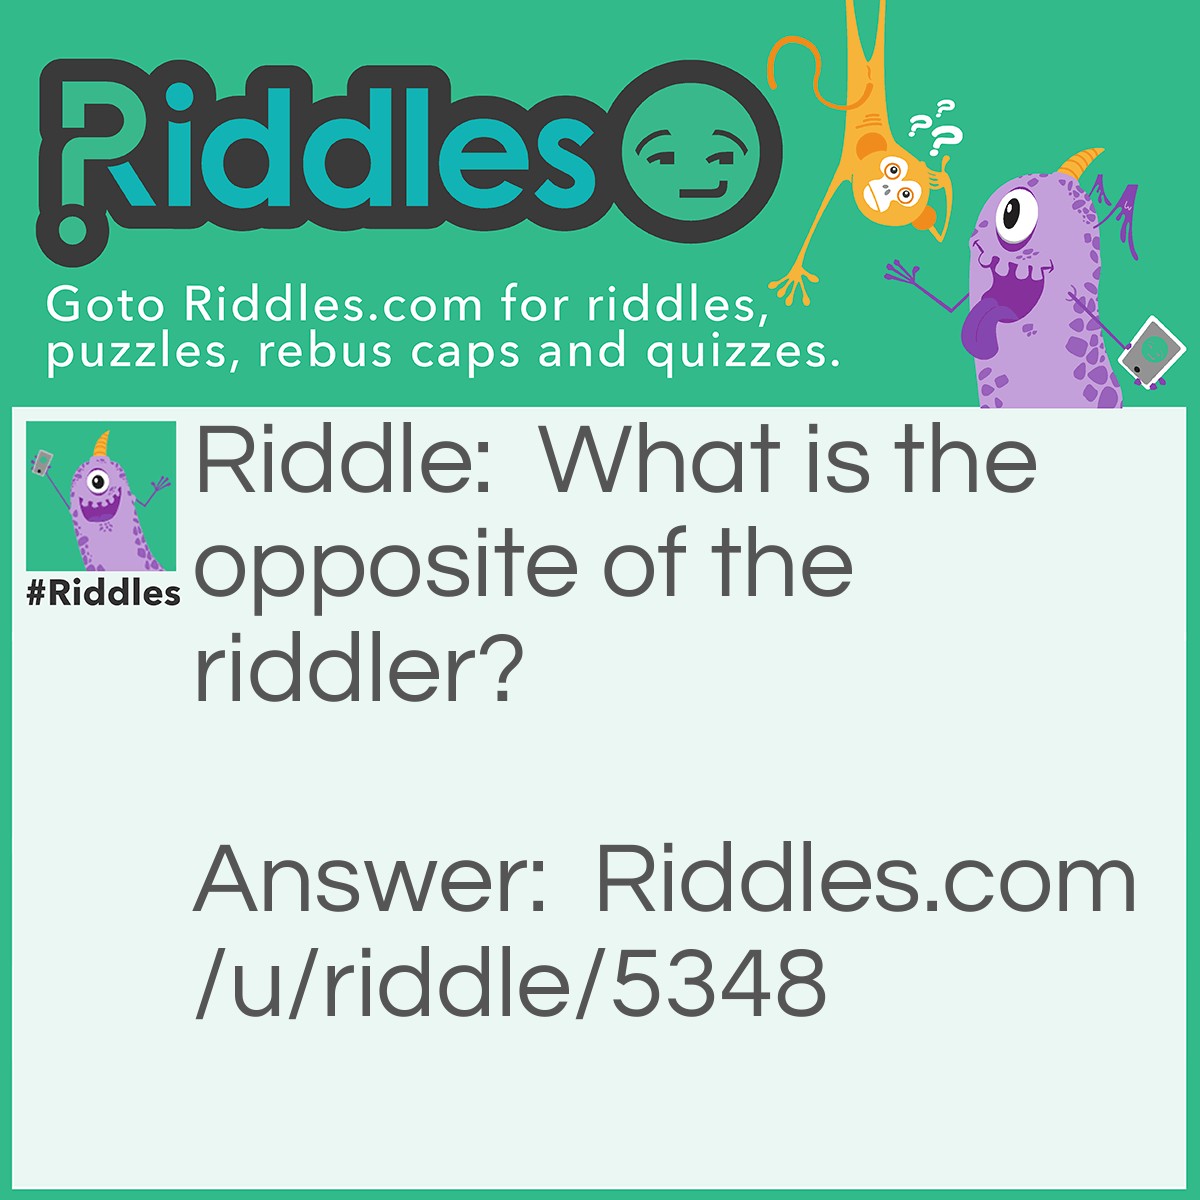 Riddle: What is the opposite of the riddler? Answer: Girl/female (the riddler is a boy).